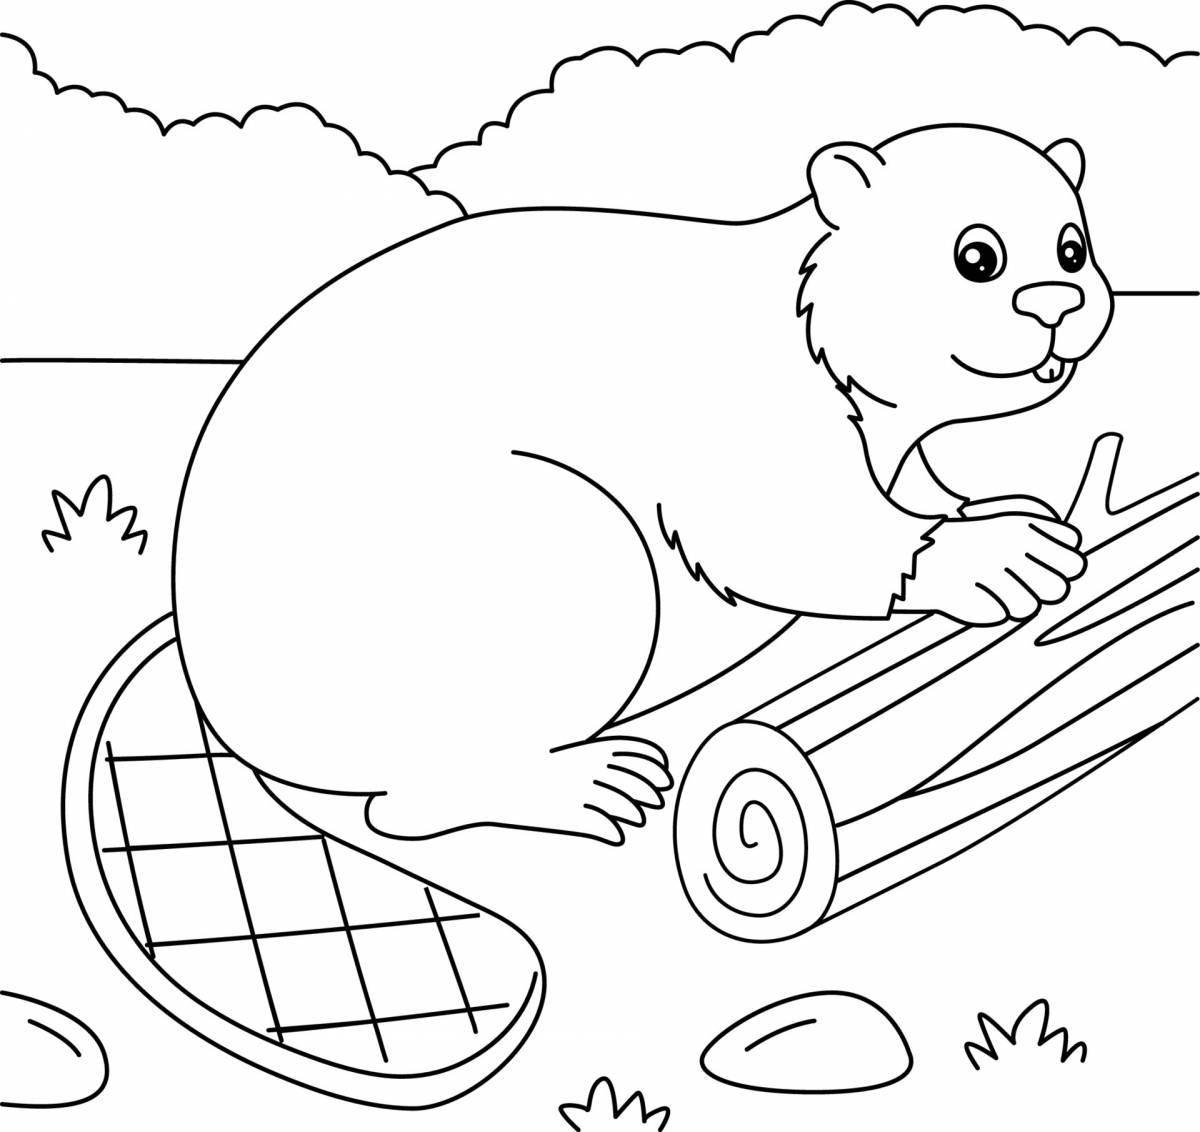 Beaver live coloring